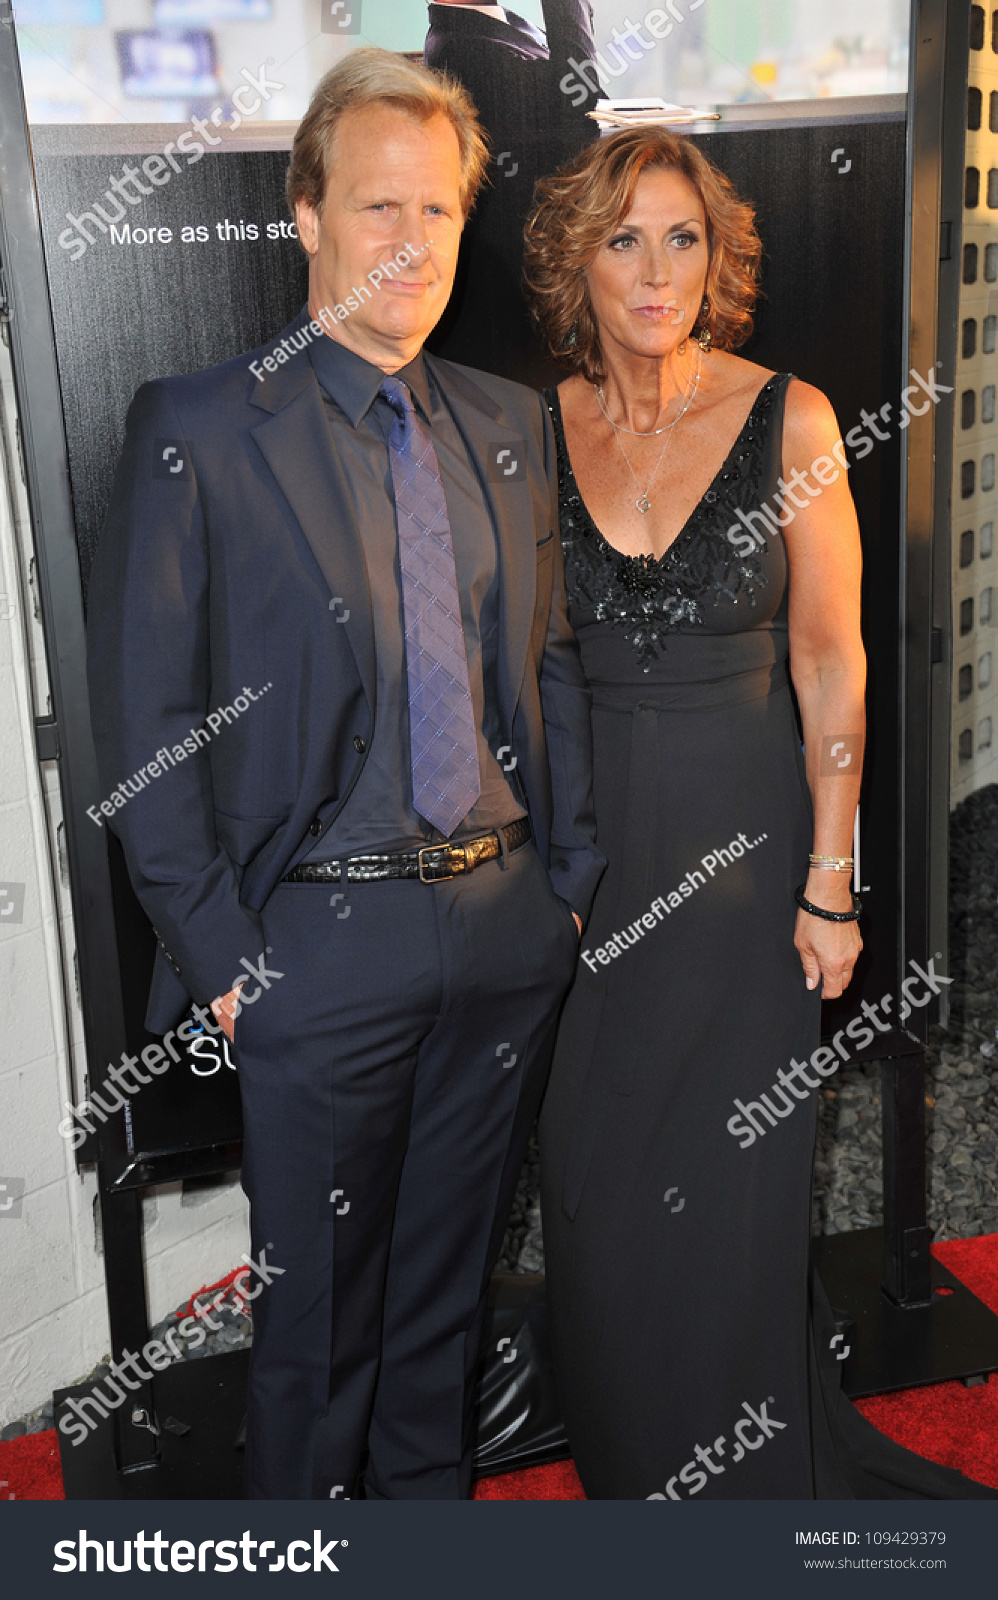 Jeff Daniels & Wife At The Los Angeles Premiere For Hbo'S New Series ...